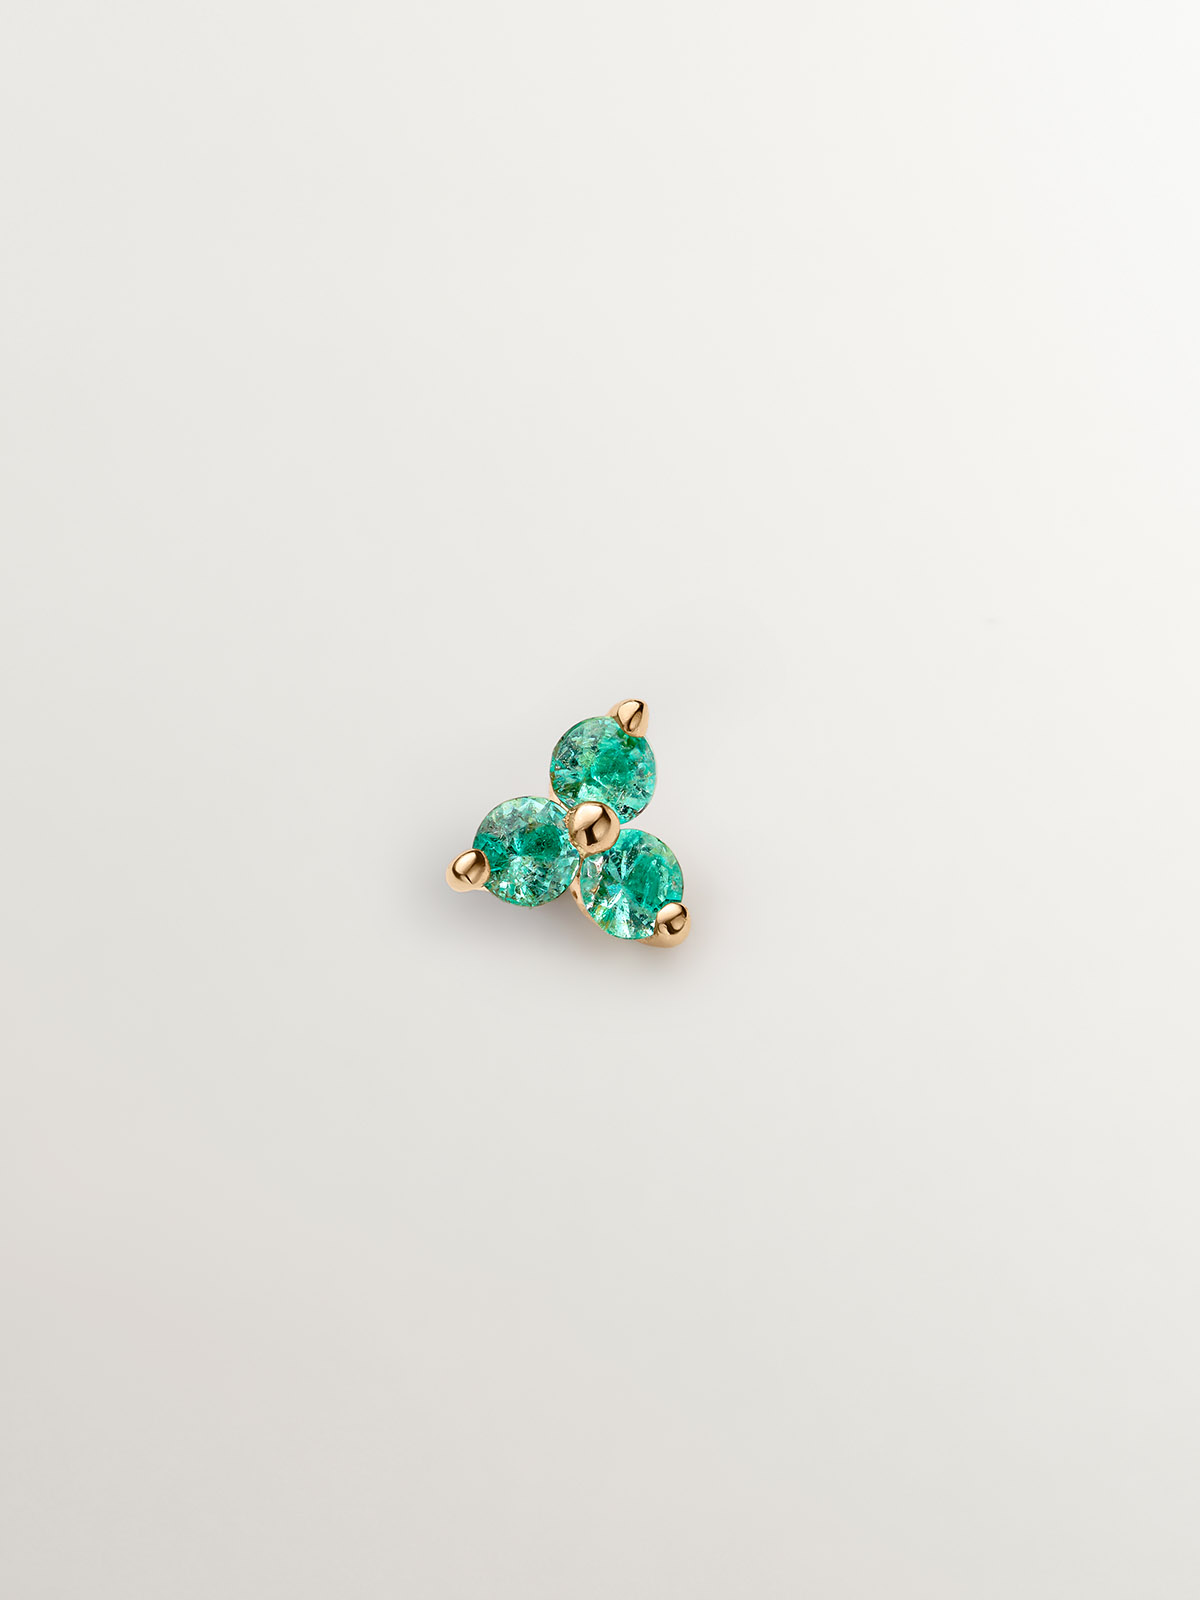 Individual 9K yellow gold earring with emerald clover